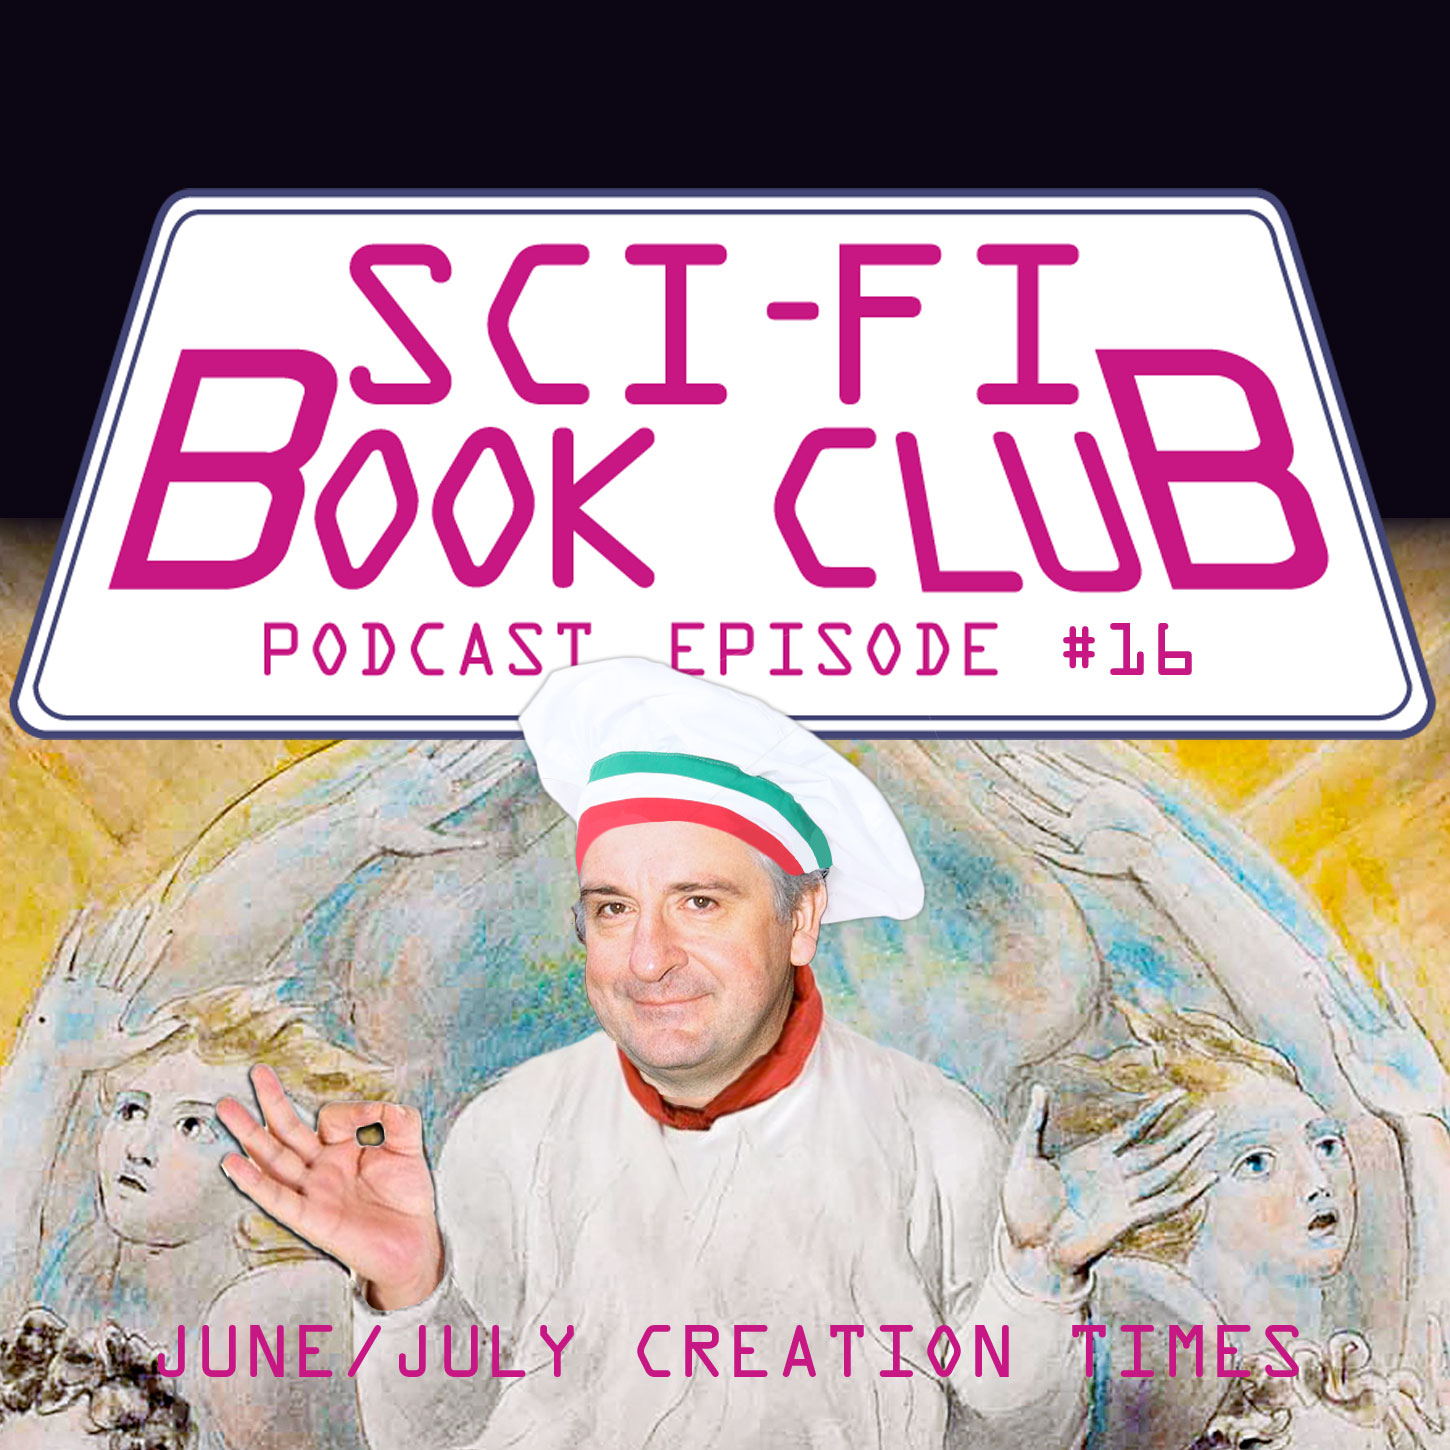 Sci-Fi Book Club Podcast #16: June/July Creation Times